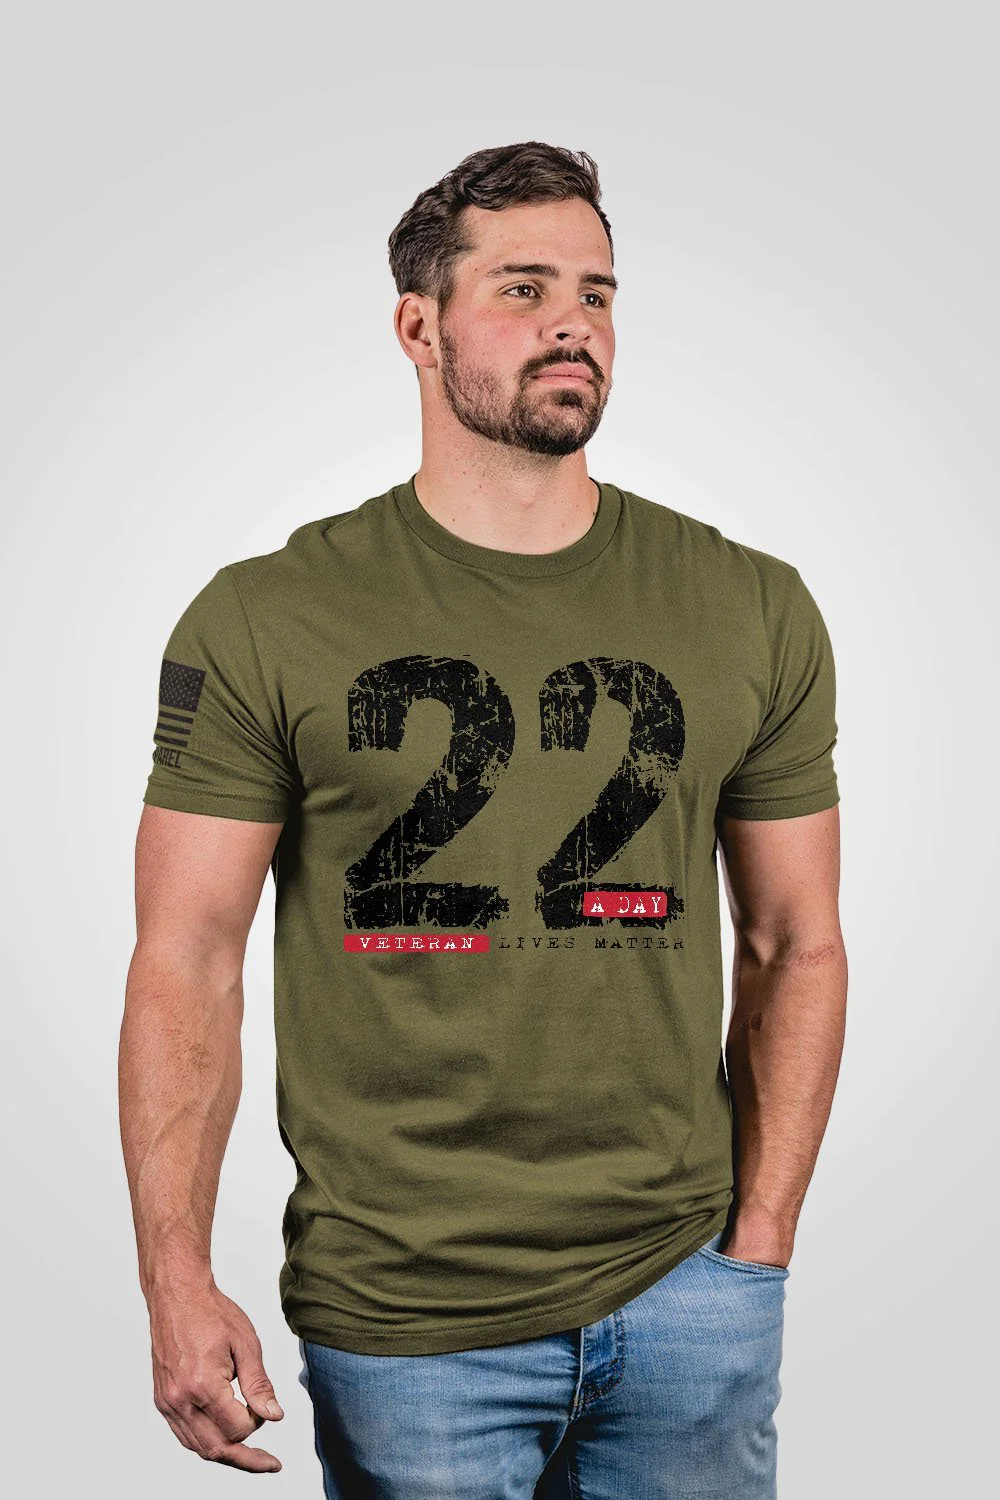 Nine Line Men's 22 A Day T-Shirt posted by ProdOrigin USA in Men's Apparel